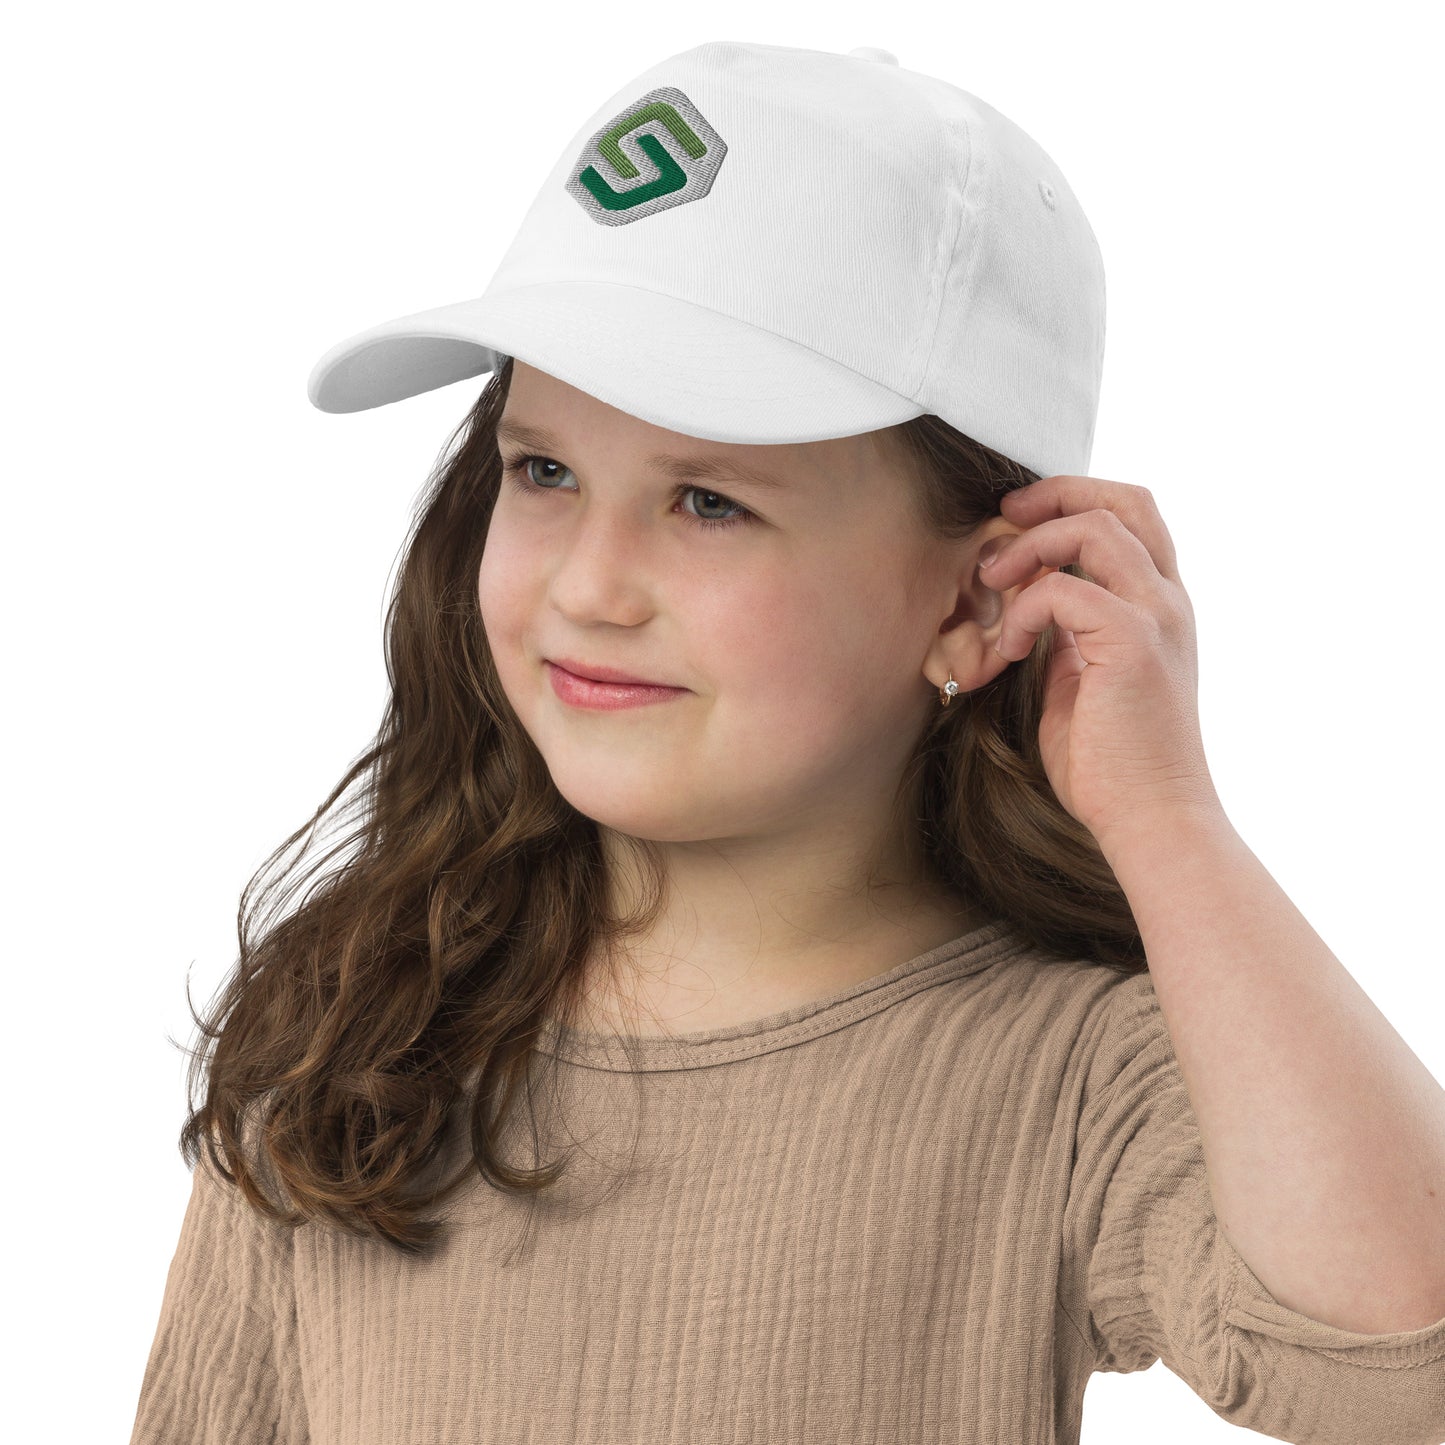 Crucial Kids Embroidered Baseball Cap